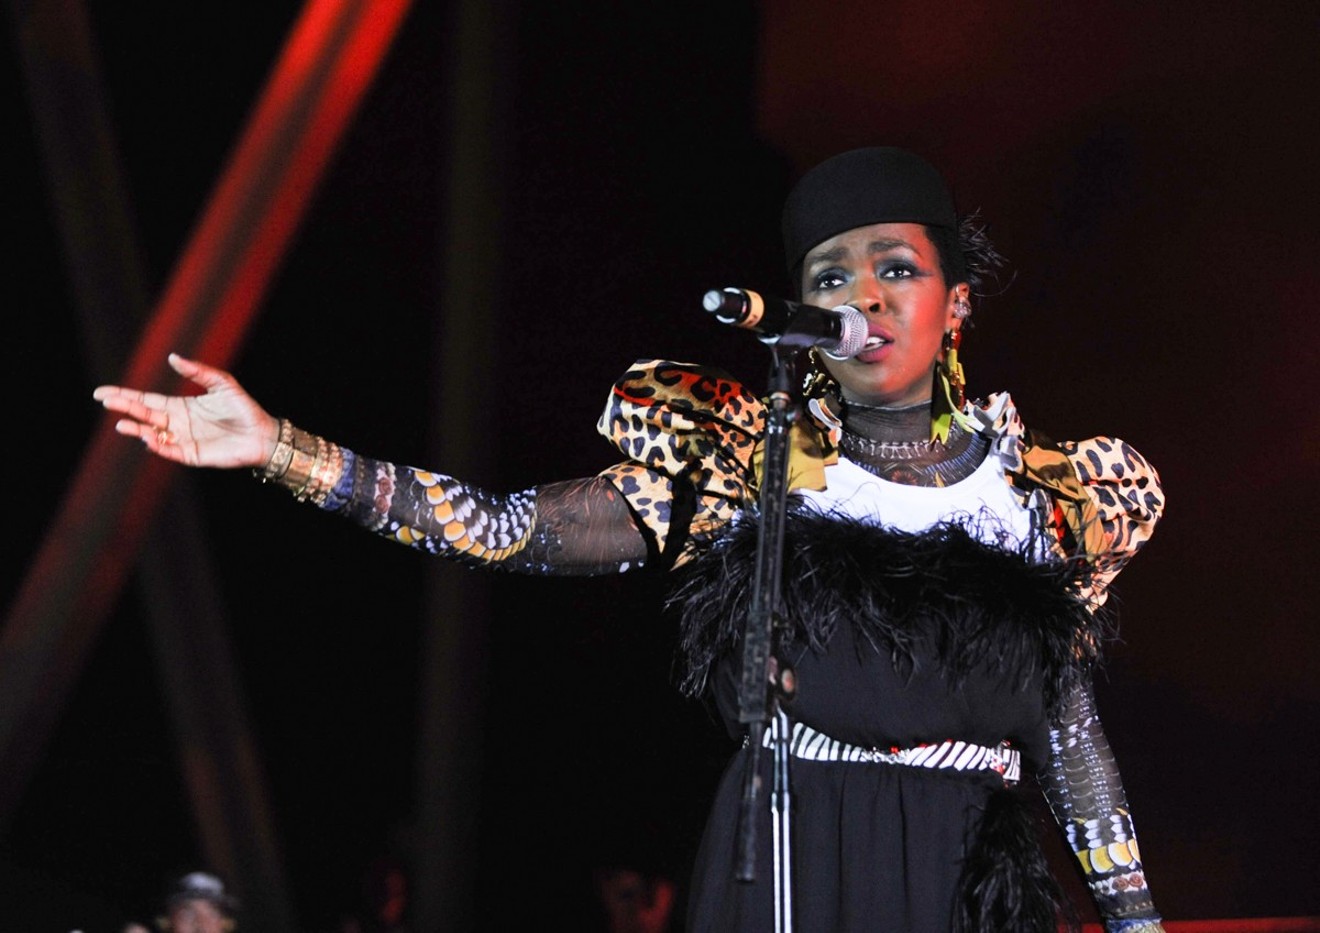 Lauryn Hill at Kaya Fest 2017. See more photos from Kaya Fest 2017 at Bayfront Park Amphitheater here.